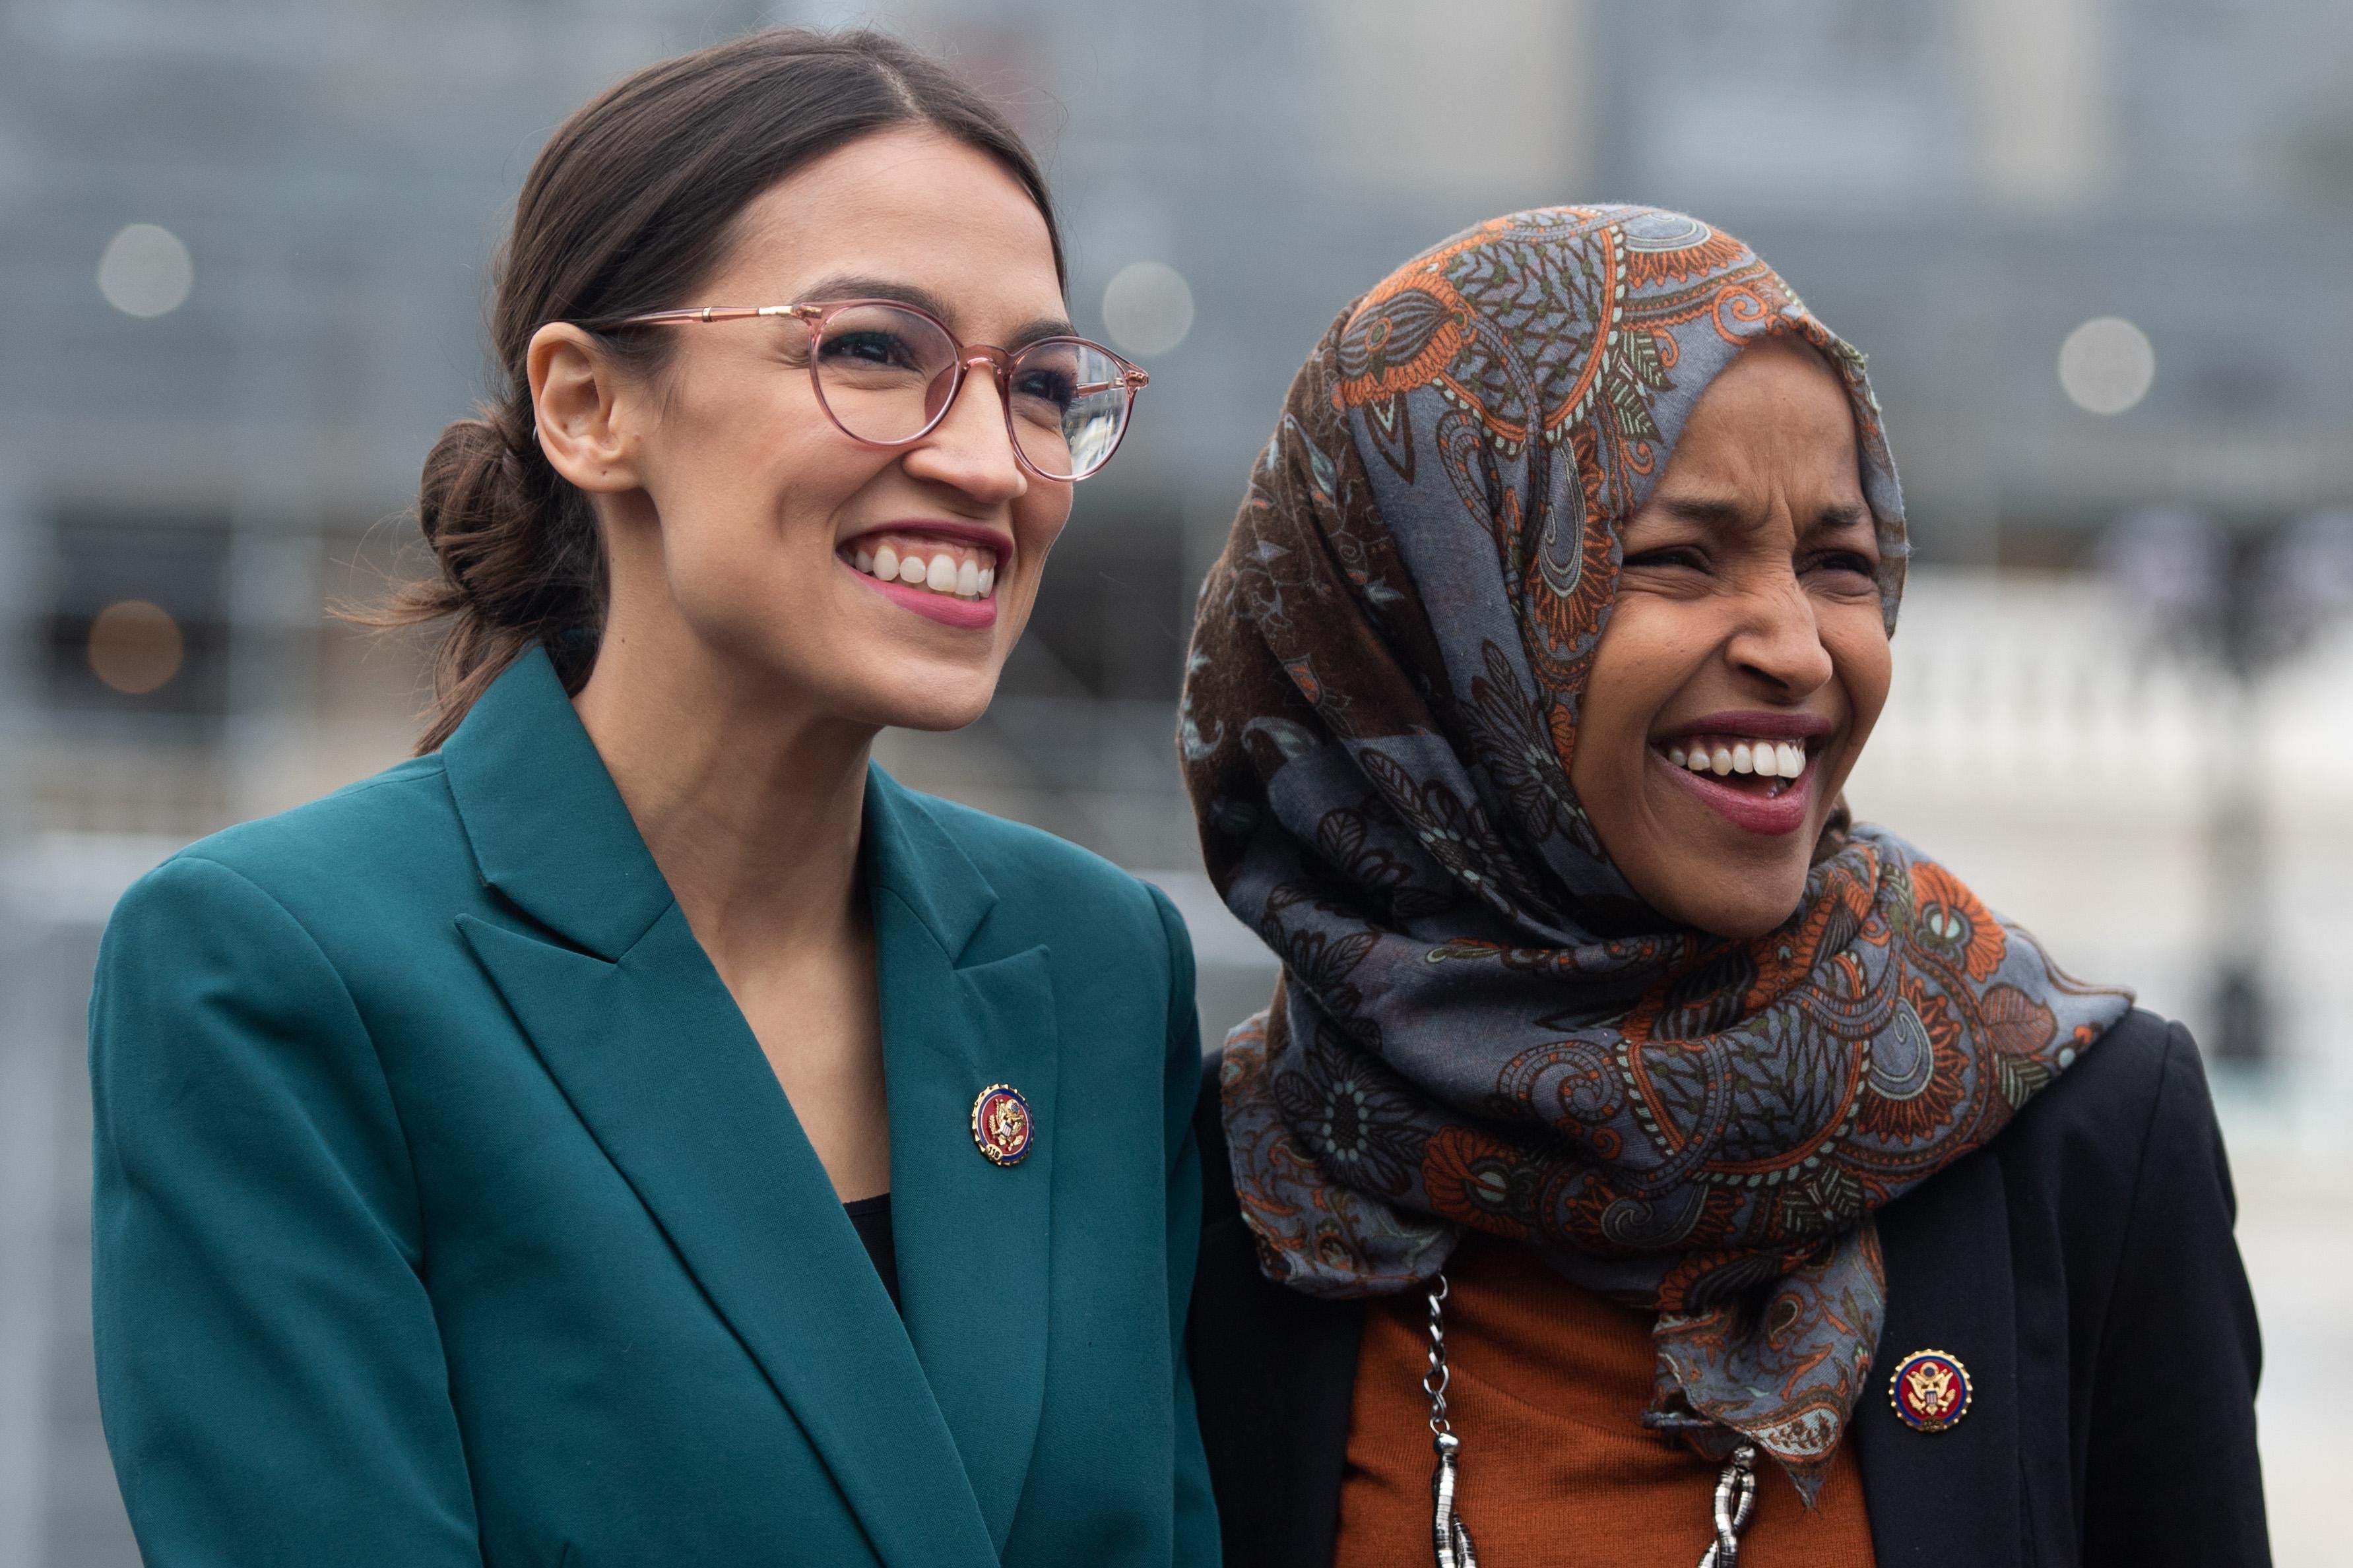 Rep.e Alexandria Ocasio-Cortez, Democrat of New York, and Rep. Ilhan Omar (R), Democrat of Minnesota, attend a press conference outside the Capitol in Washington, D.C. on February 7, 2019.